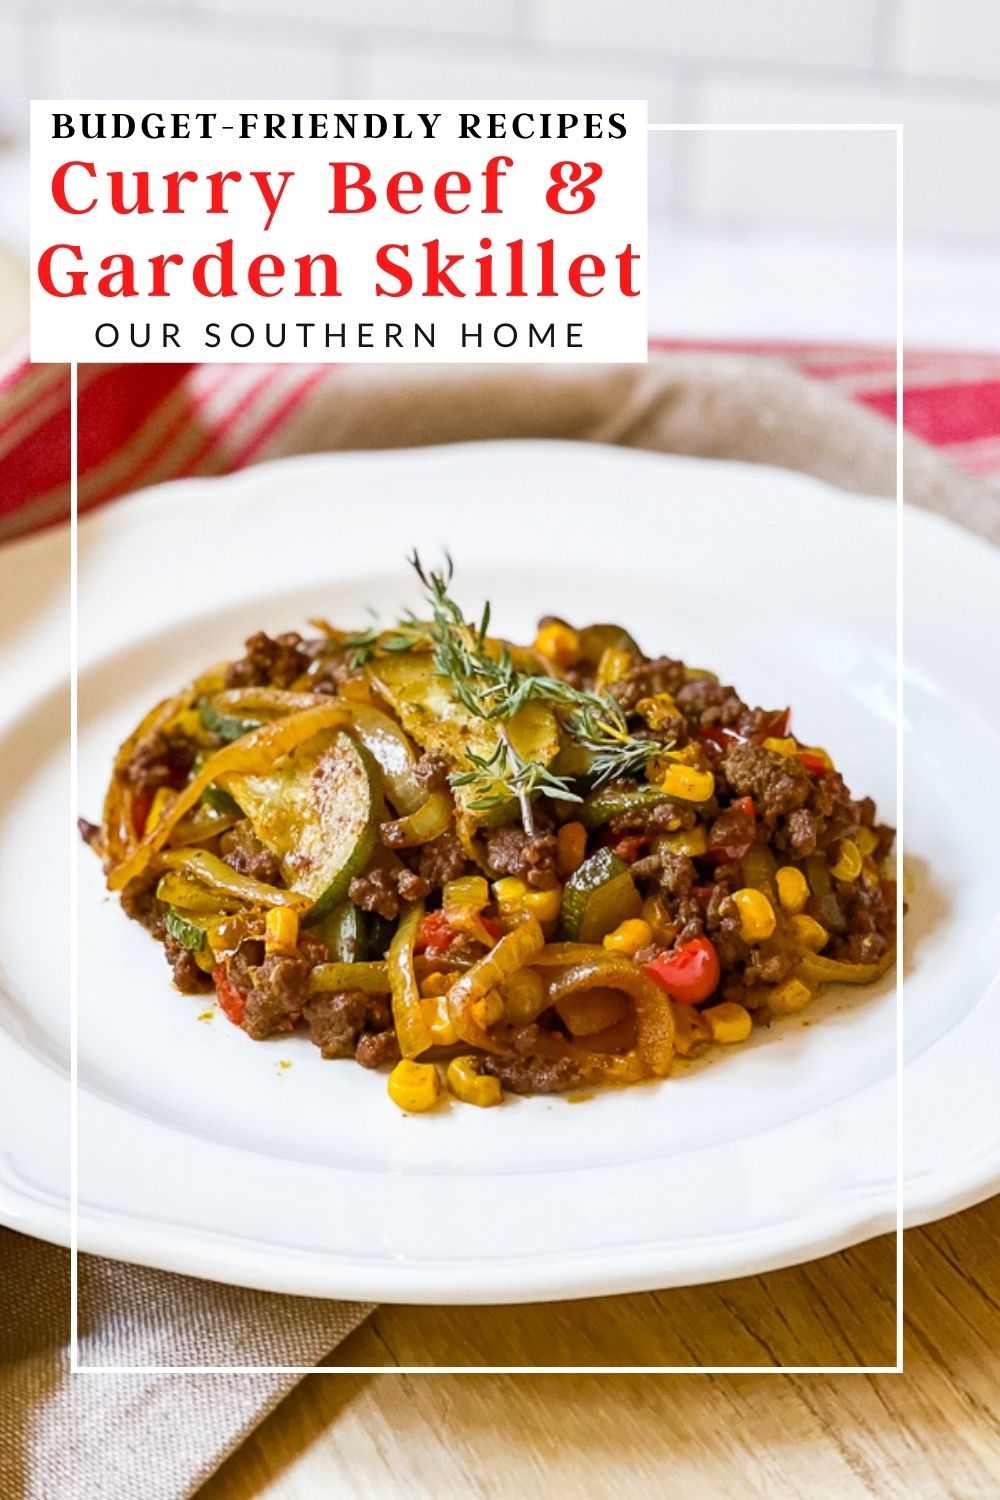 https://www.oursouthernhomesc.com/wp-content/uploads/curry-beef-garden-skillet-pin.jpg